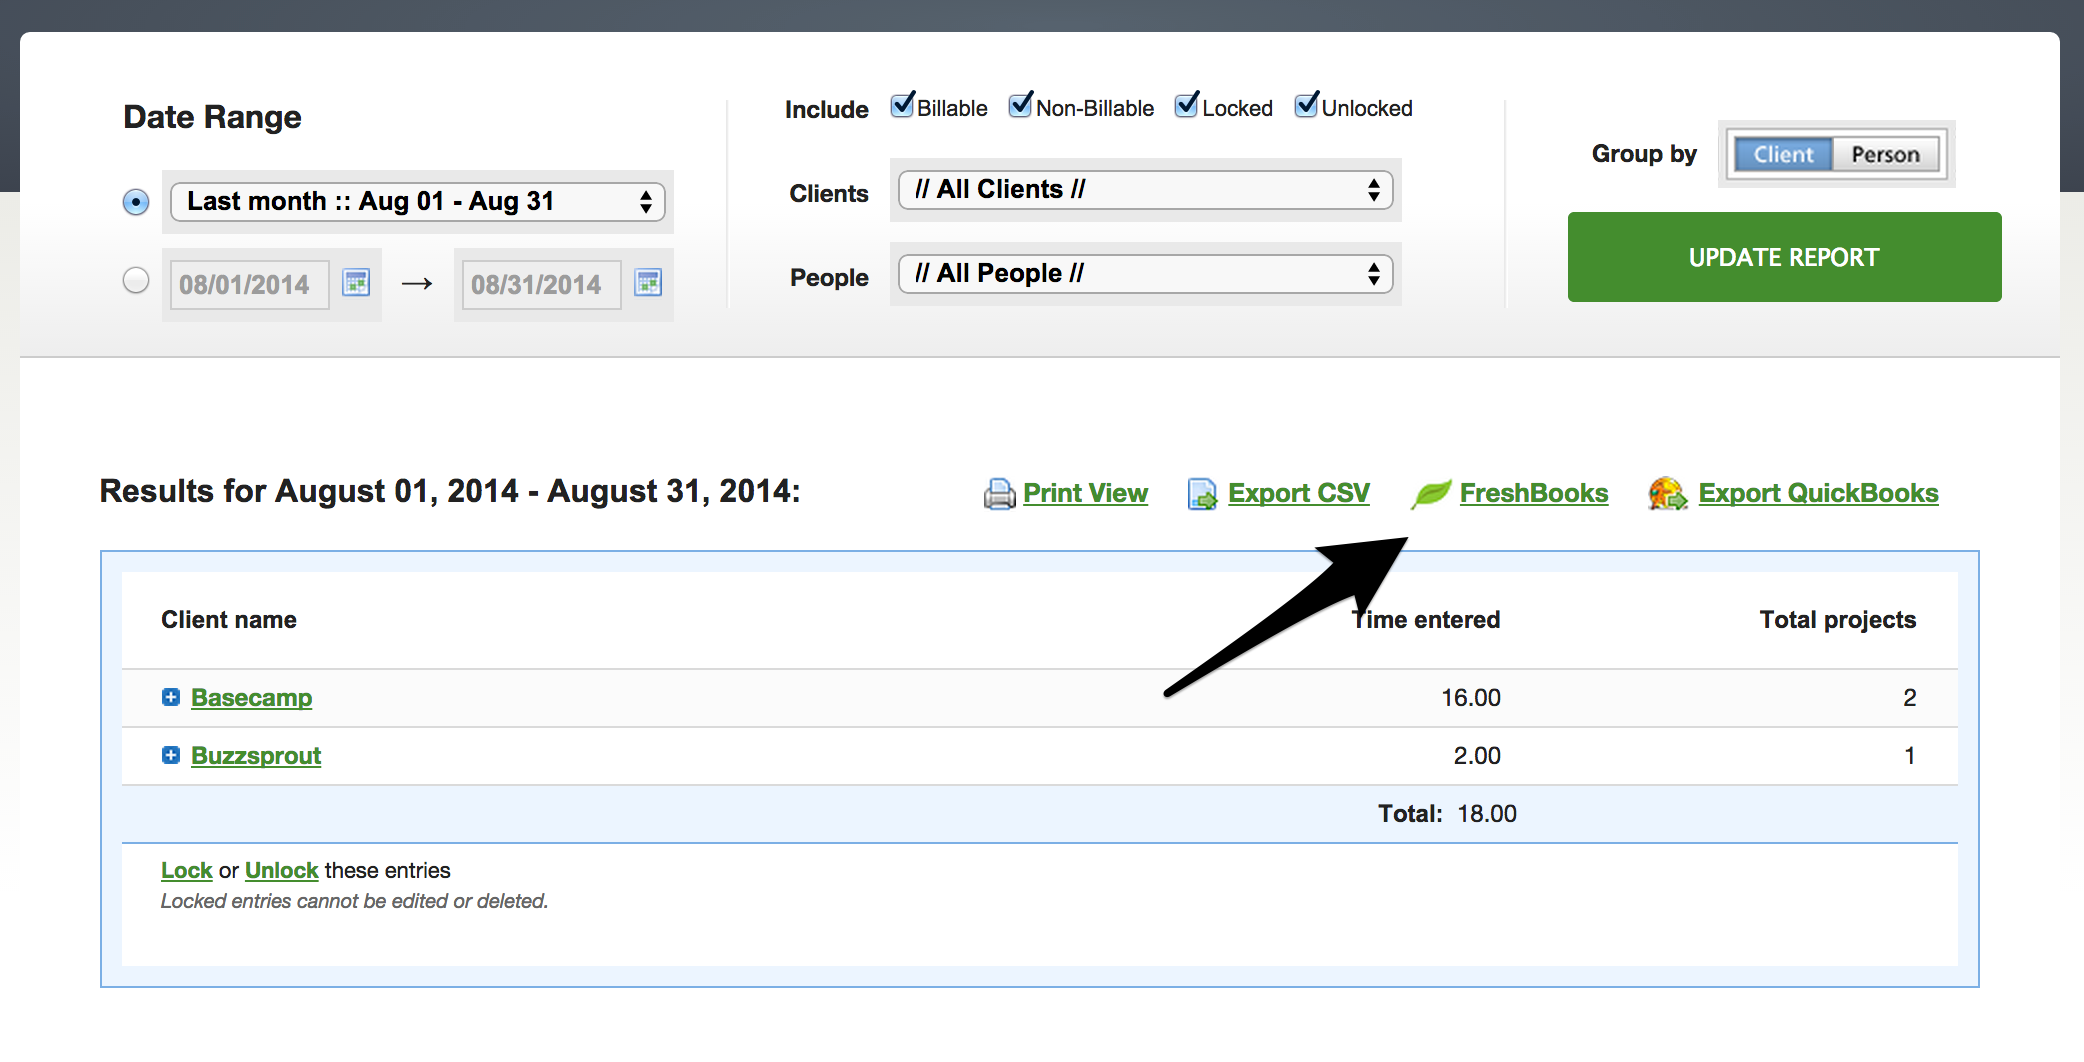 Enable Freshbooks view in reports